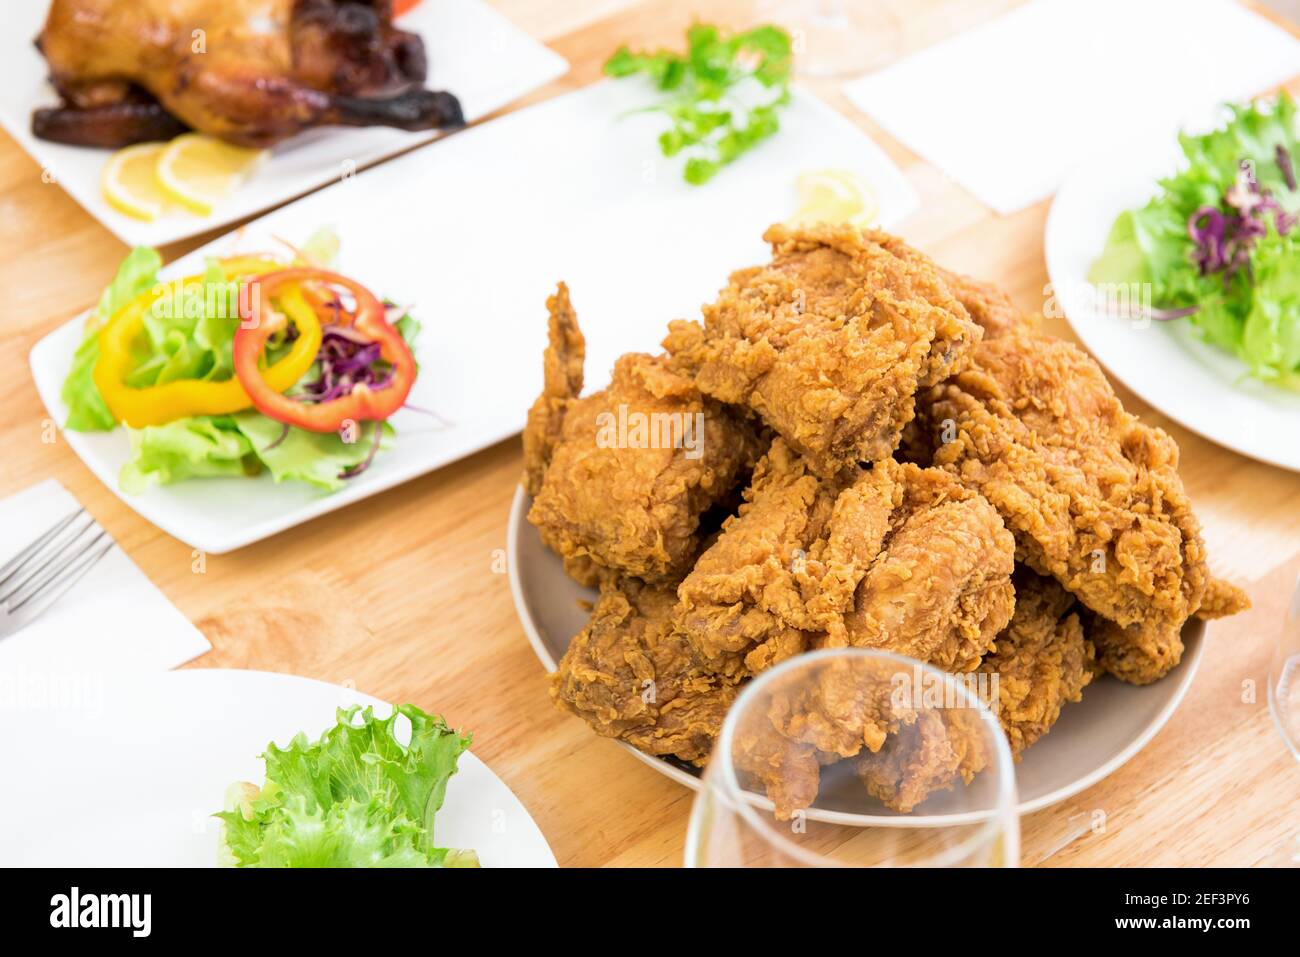 Chicken on dinning table, ready to eat Stock Photo